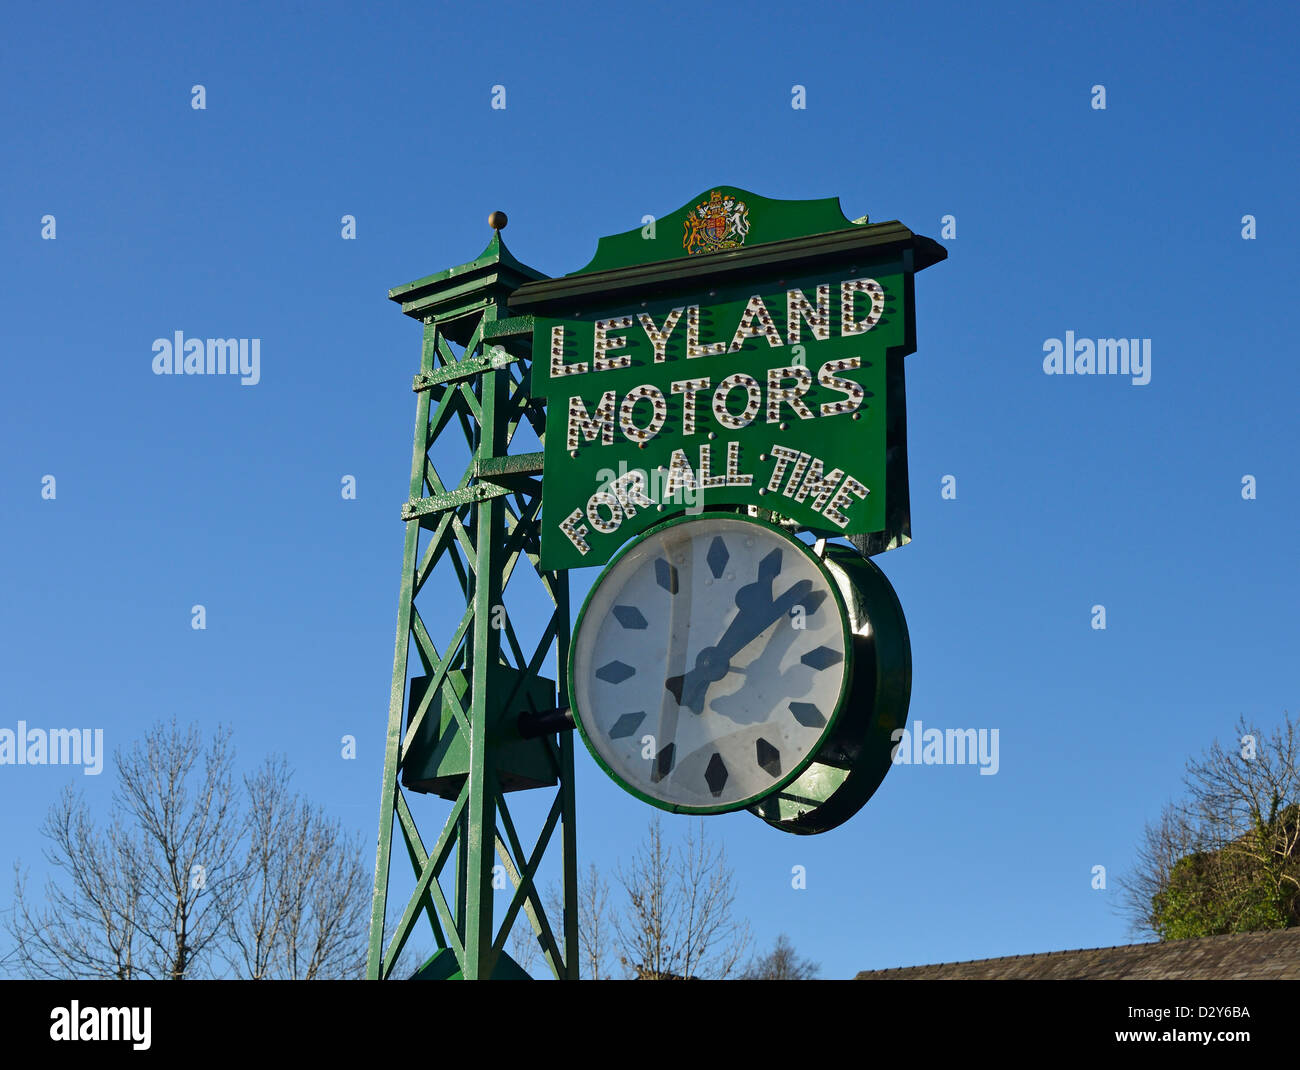 'LEYLAND MOTORS FOR ALL TIME'. The Leyland Clock. Brewery Arts Centre, Highgate, Kendal, Cumbria, England, United Kingdom. Stock Photo